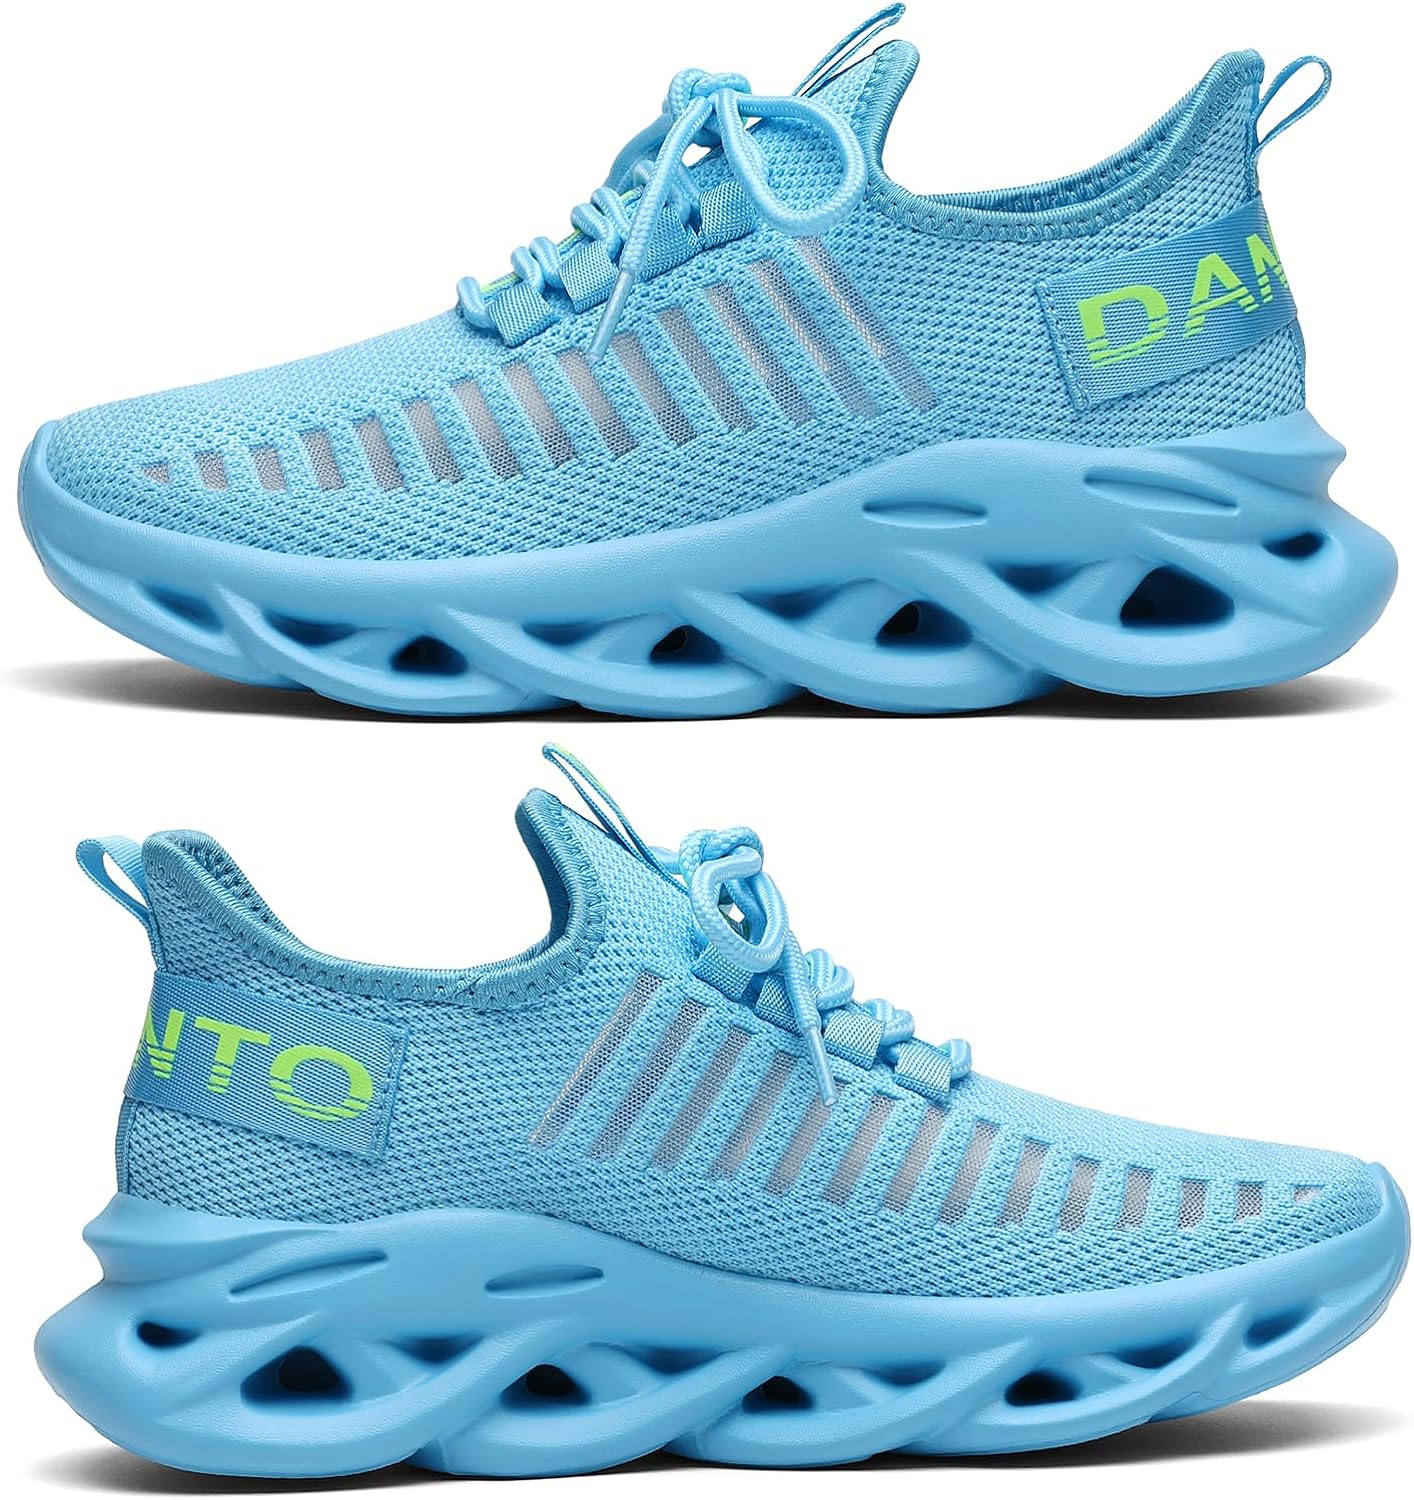 DANNTO Men Women Sneakers Lightweight Gym Fashion Shoes Breathable Walking Running Athletic Sport